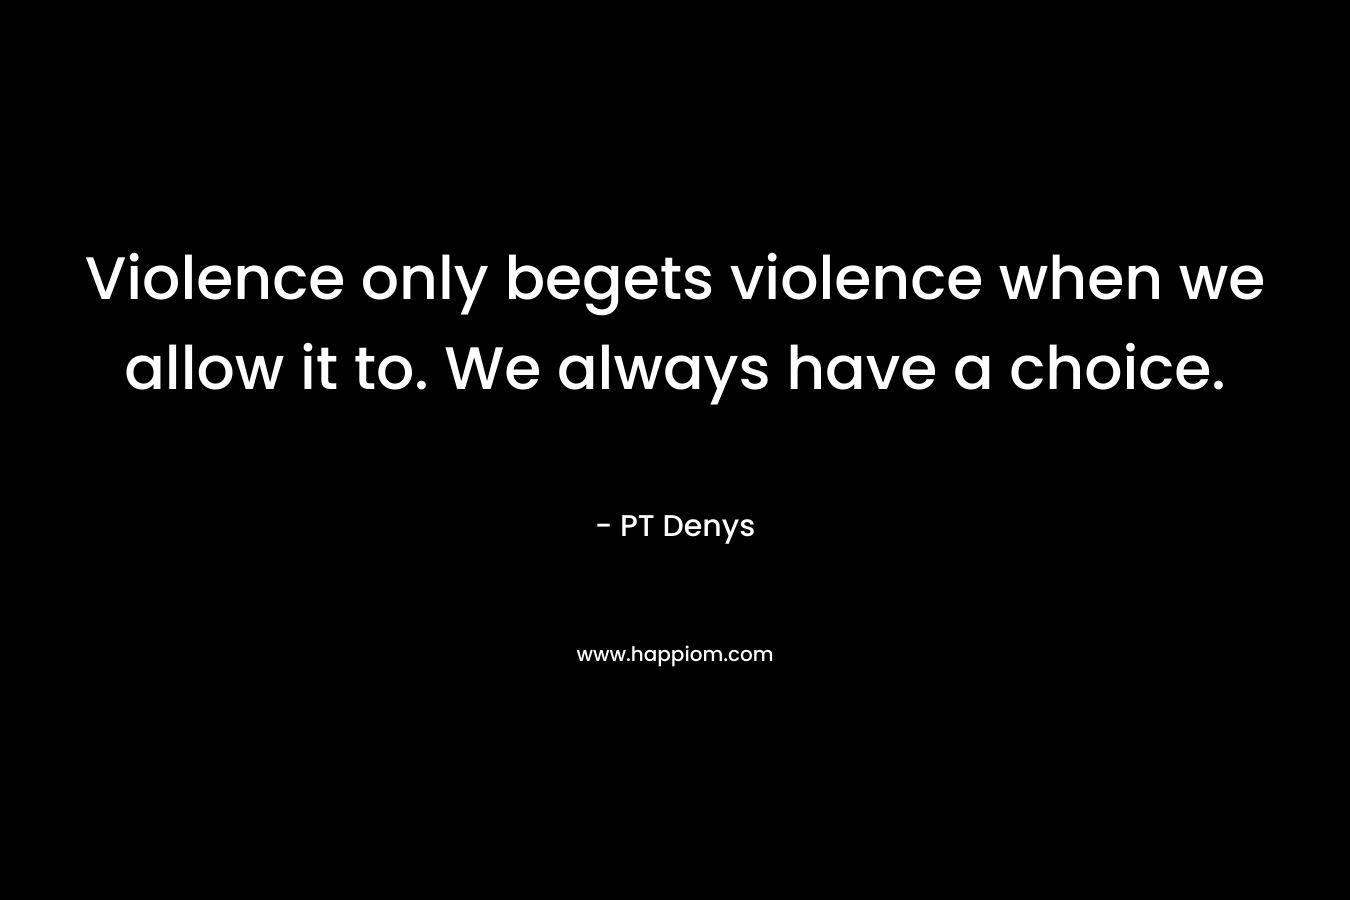 Violence only begets violence when we allow it to. We always have a choice. – PT Denys